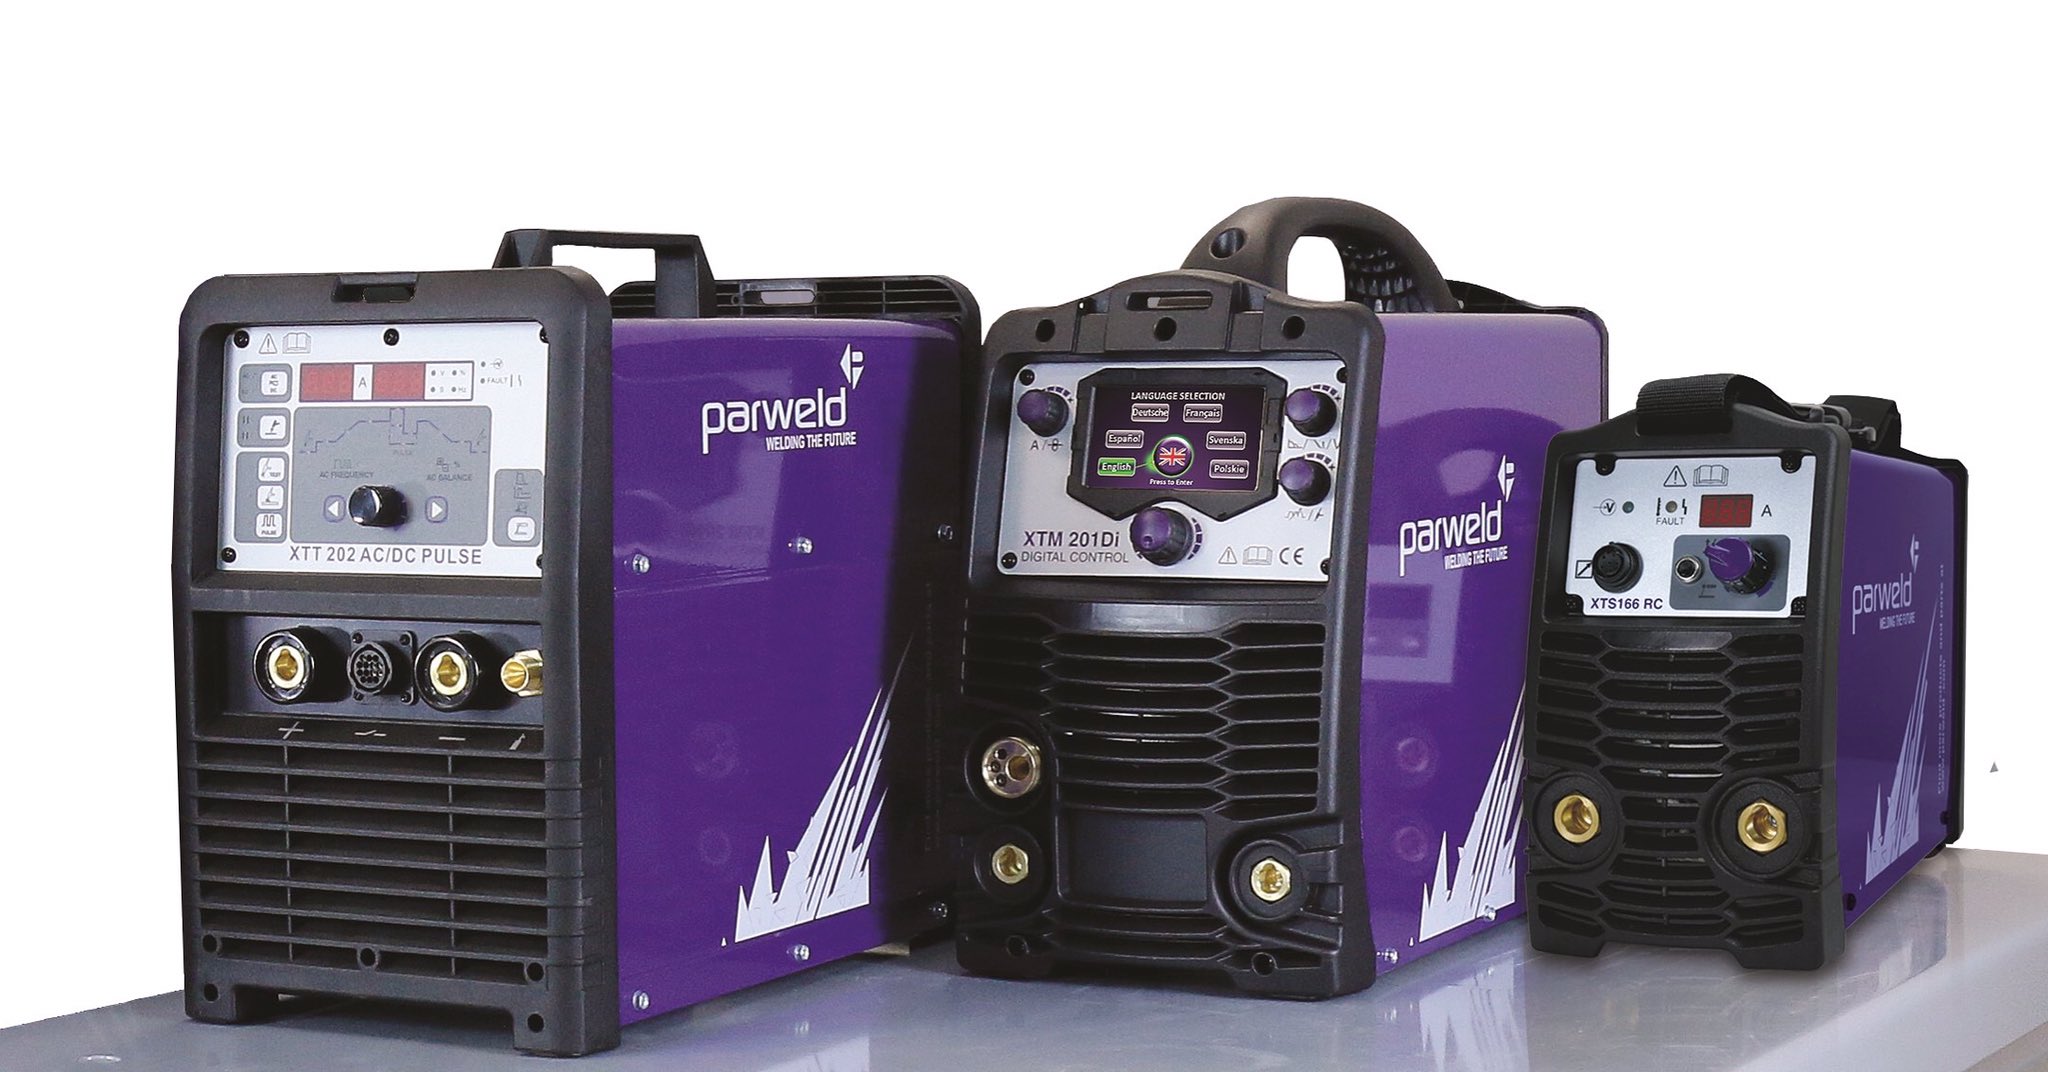 Parweld on Twitter: "Tig, Mig &amp; MMA - Watch Parweld TV on YouTube for  more info &amp; demonstrations. Did you know our inverter range is covered  for 6 years? #XTT202P #XTM201DI #XTS166RC #